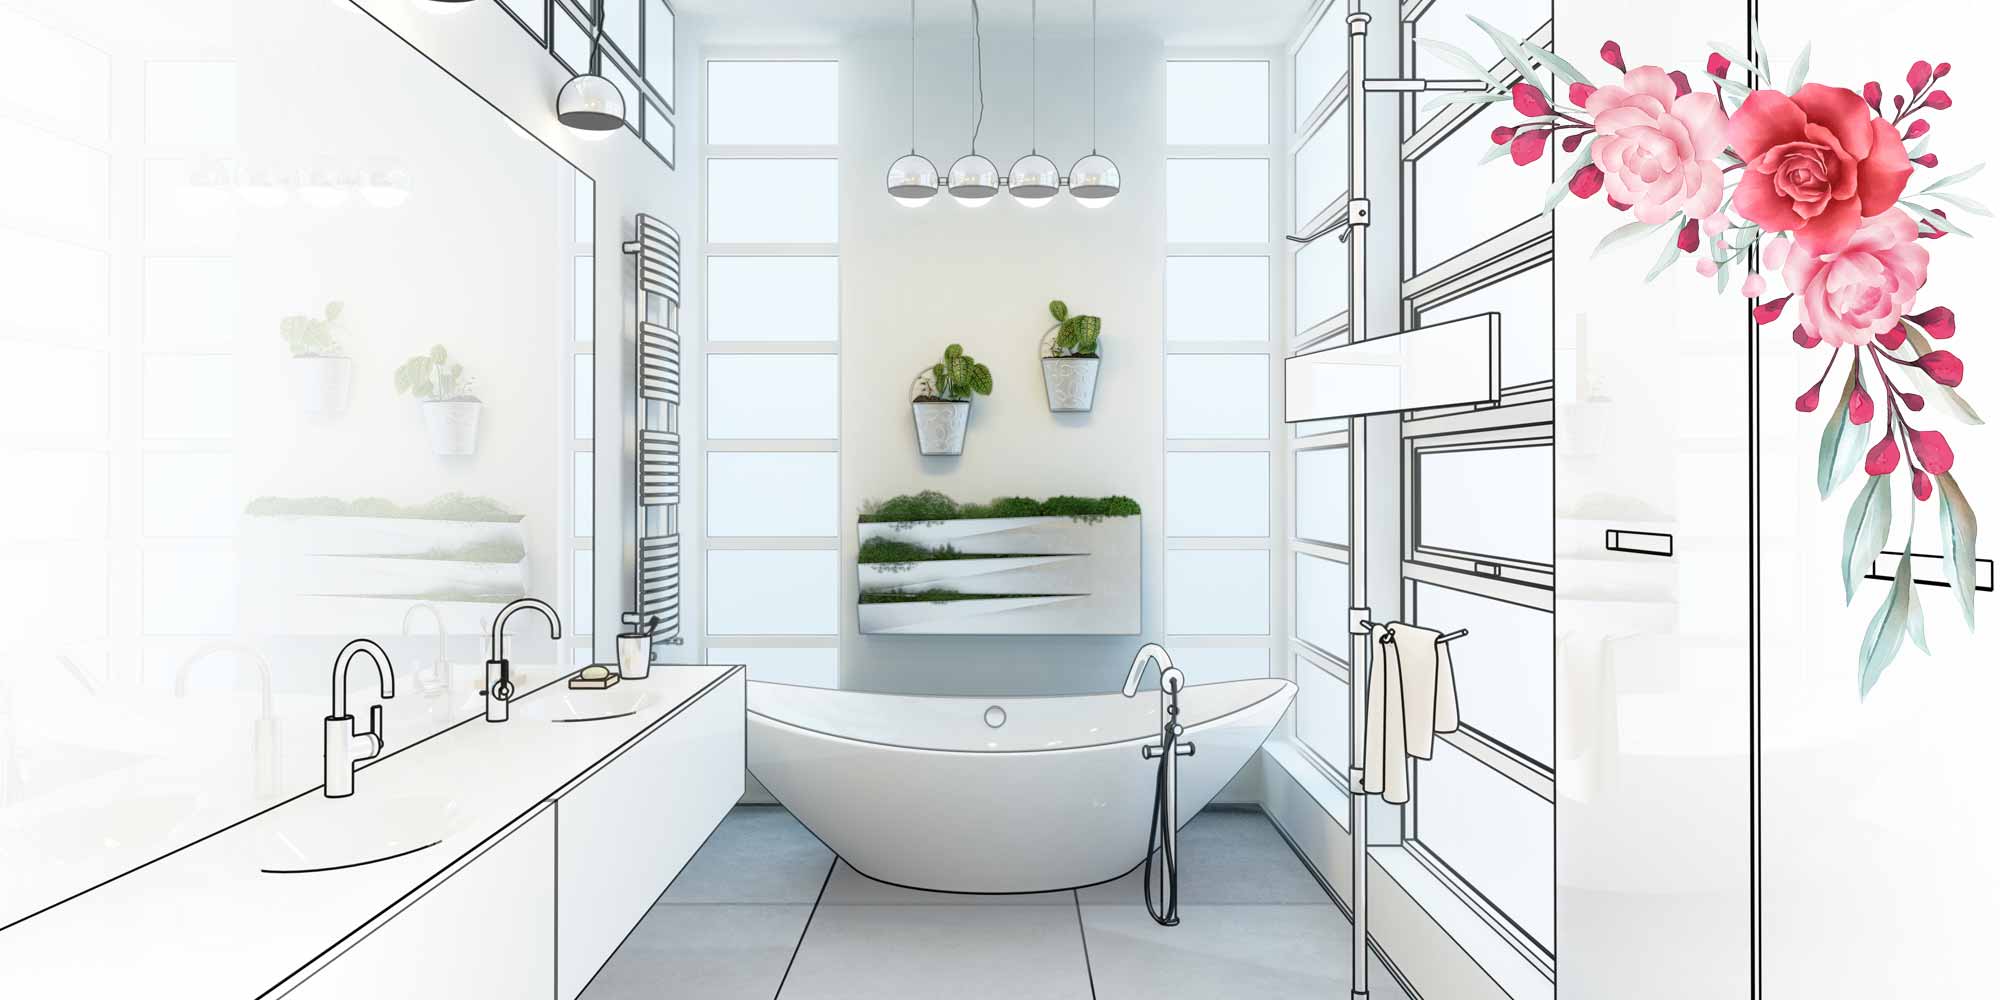 A must read article before investing in a bathroom renovation